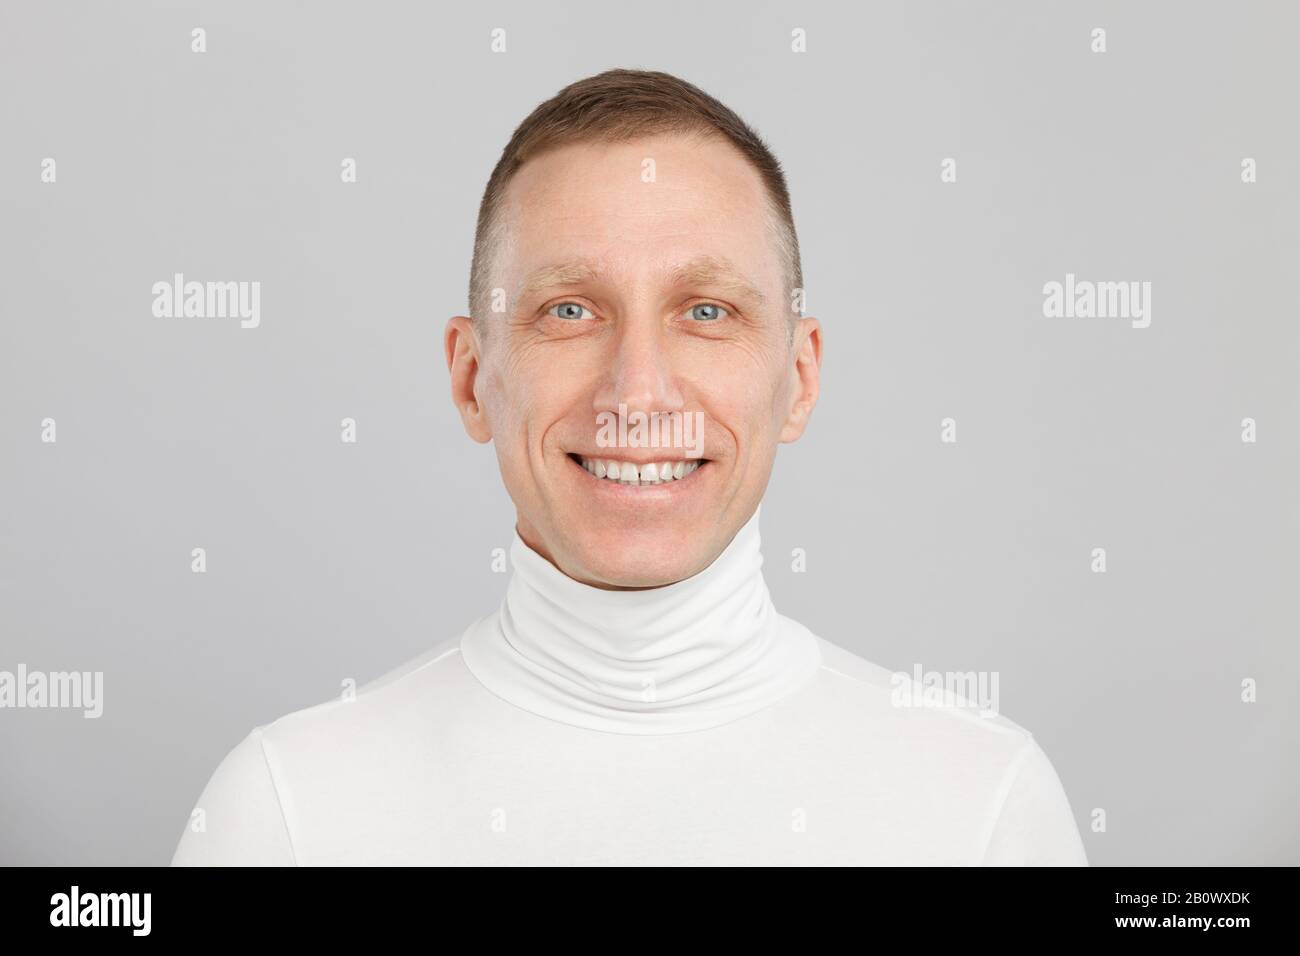 middle-aged man headshot in a white turtleneck. Stock Photo